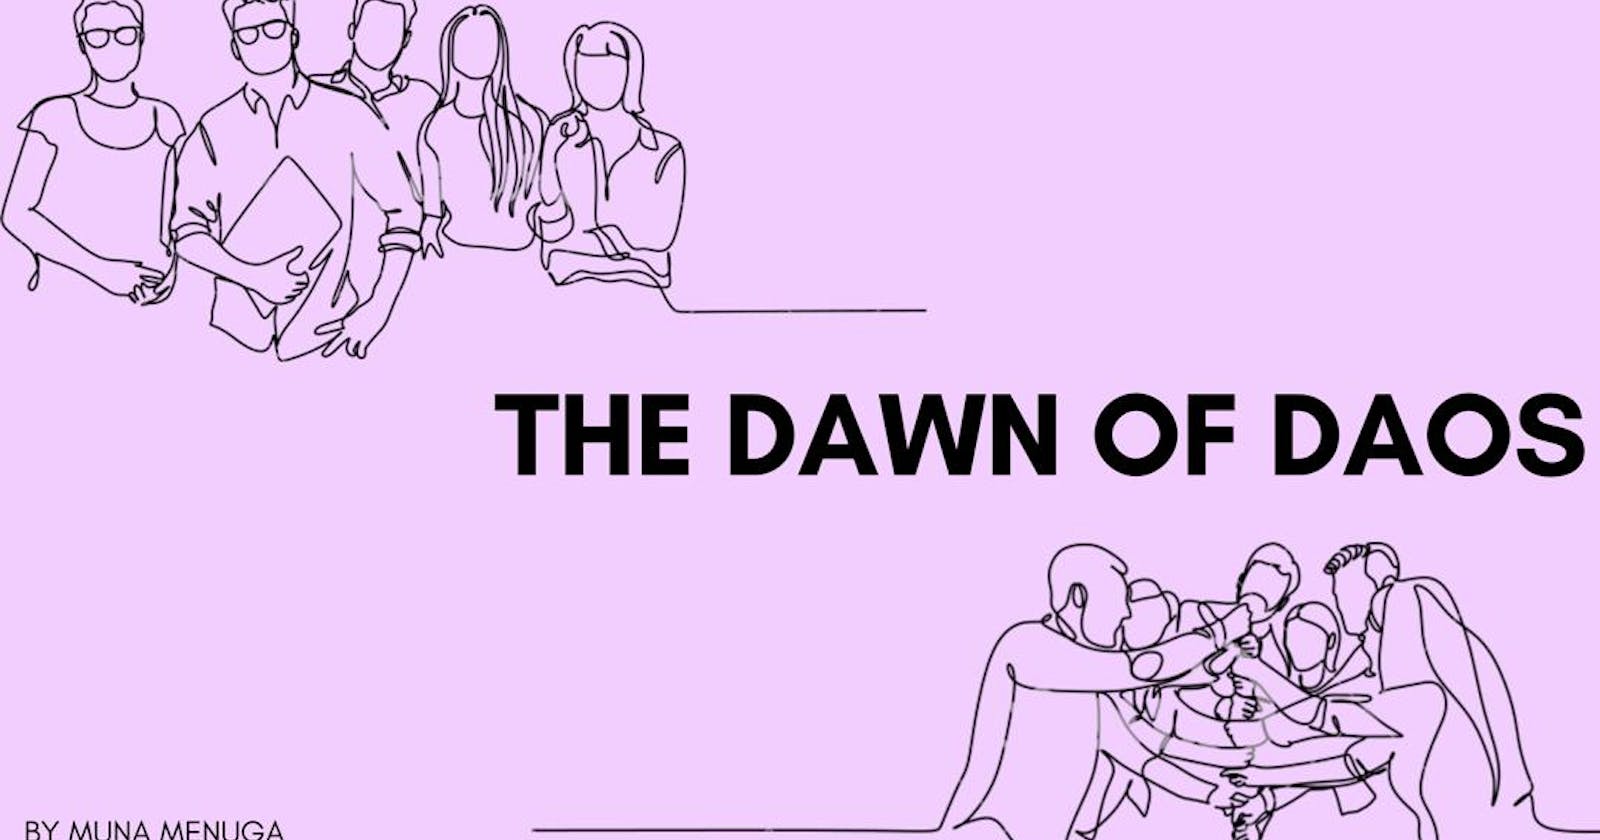 THE DAWN OF DAOs